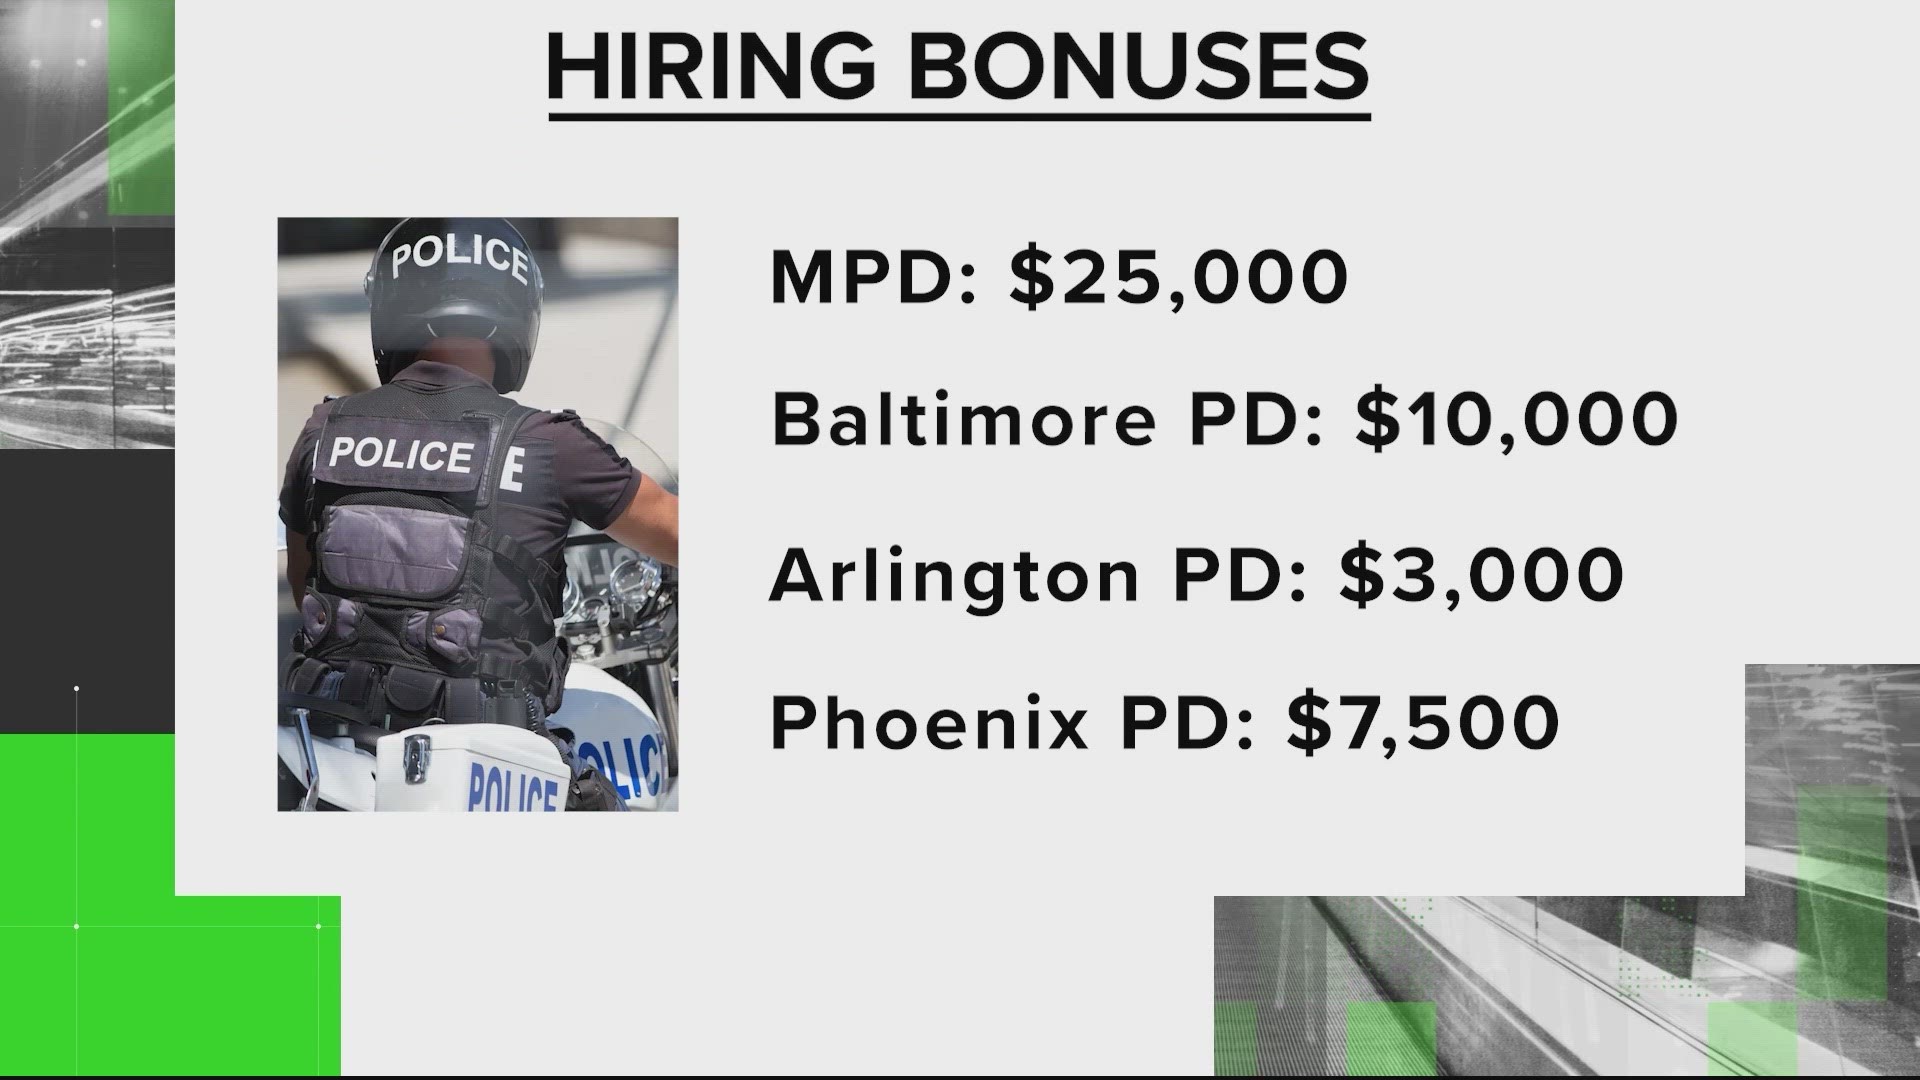 D.C. is offering $25,000 to new officers - how do other cities compare?